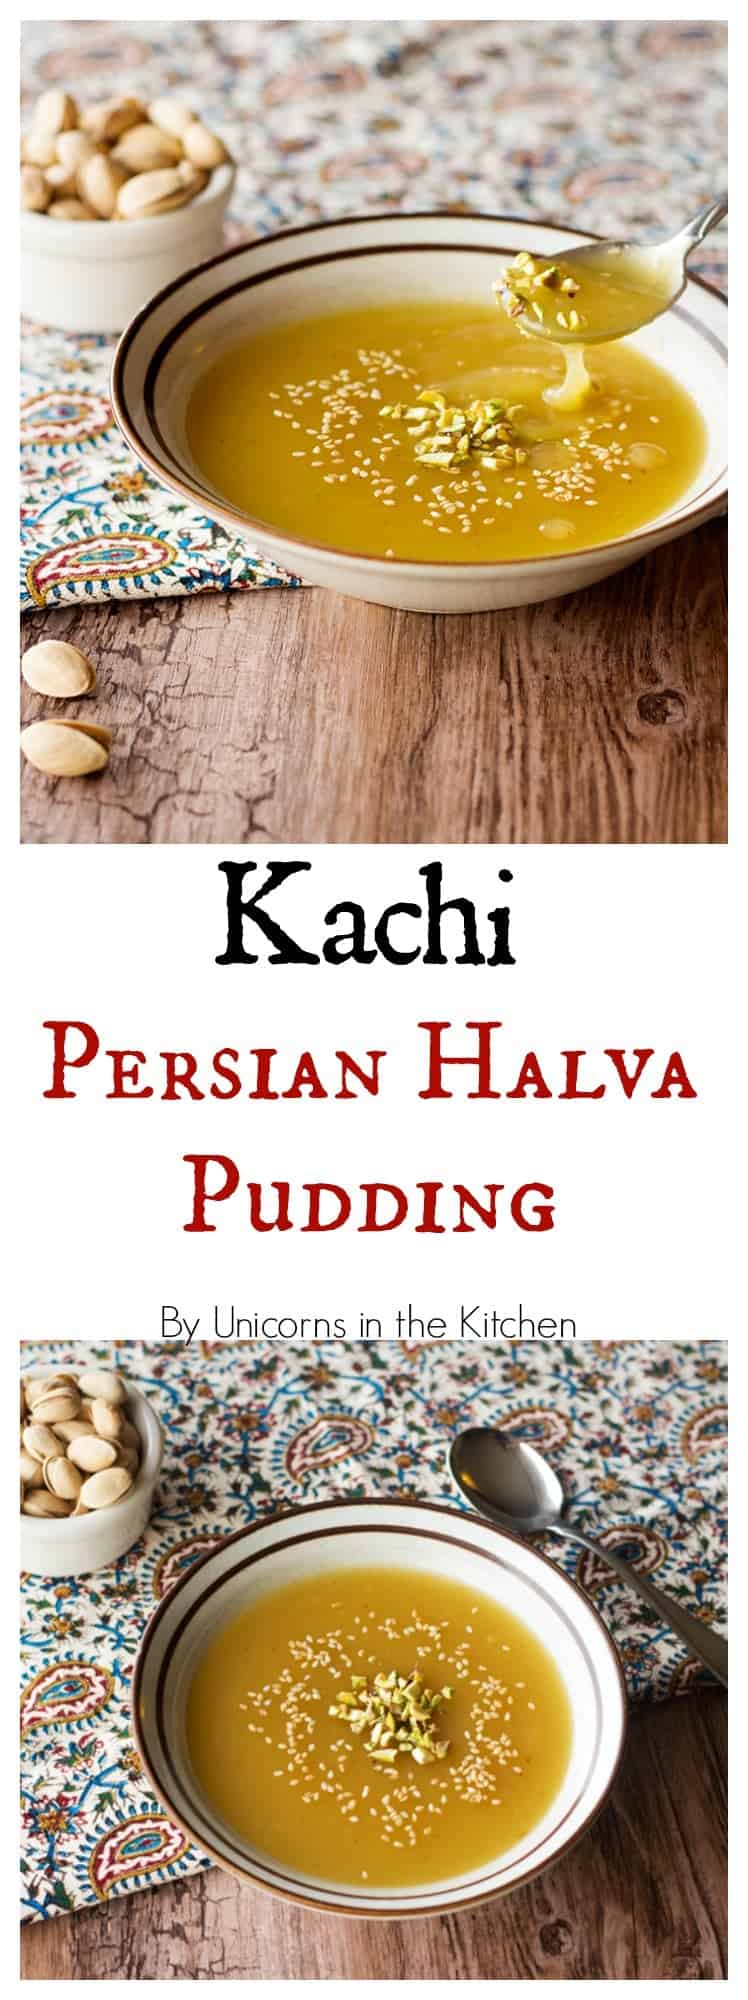 Kachi is a Persian Halva pudding that is full of saffron and rose water flavor. It's easy to make and very delicious. Full of Middle Eastern flavors! 